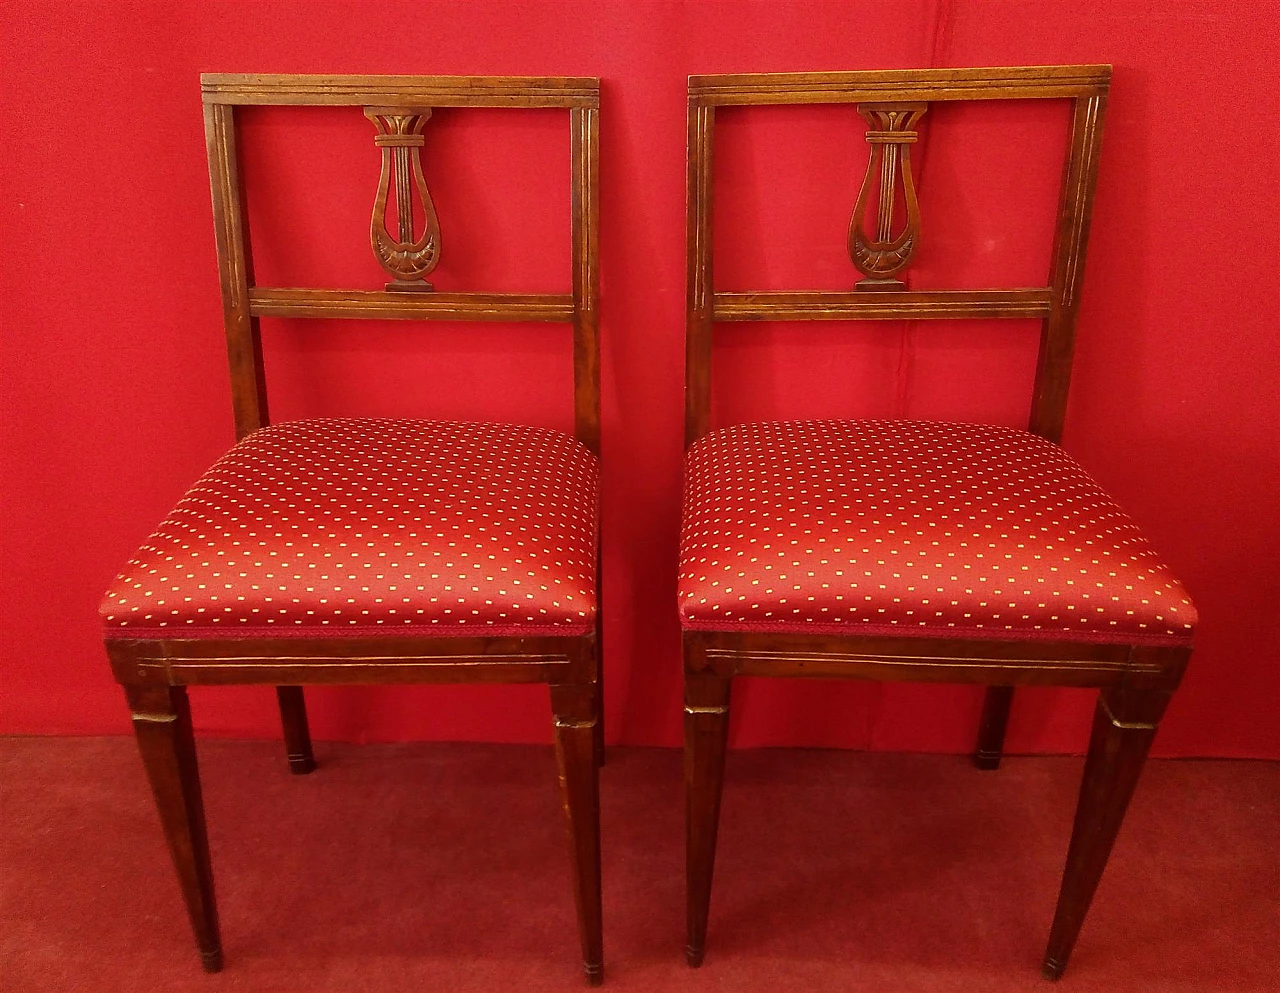 Louis XVI style sofa, armchair and pair of chairs, early 19th century 4